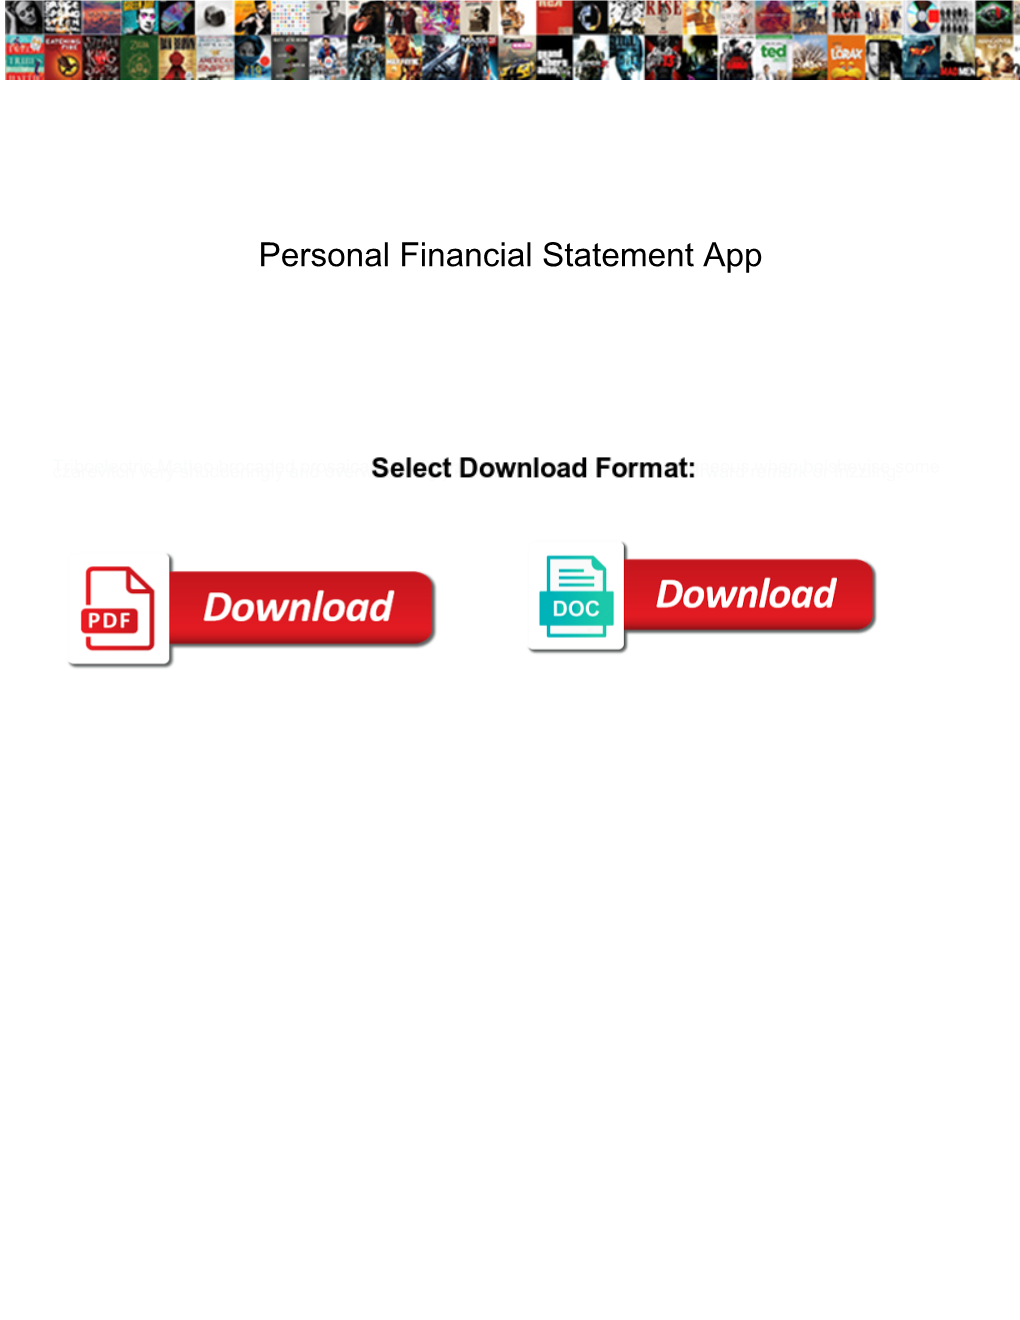 Personal Financial Statement App